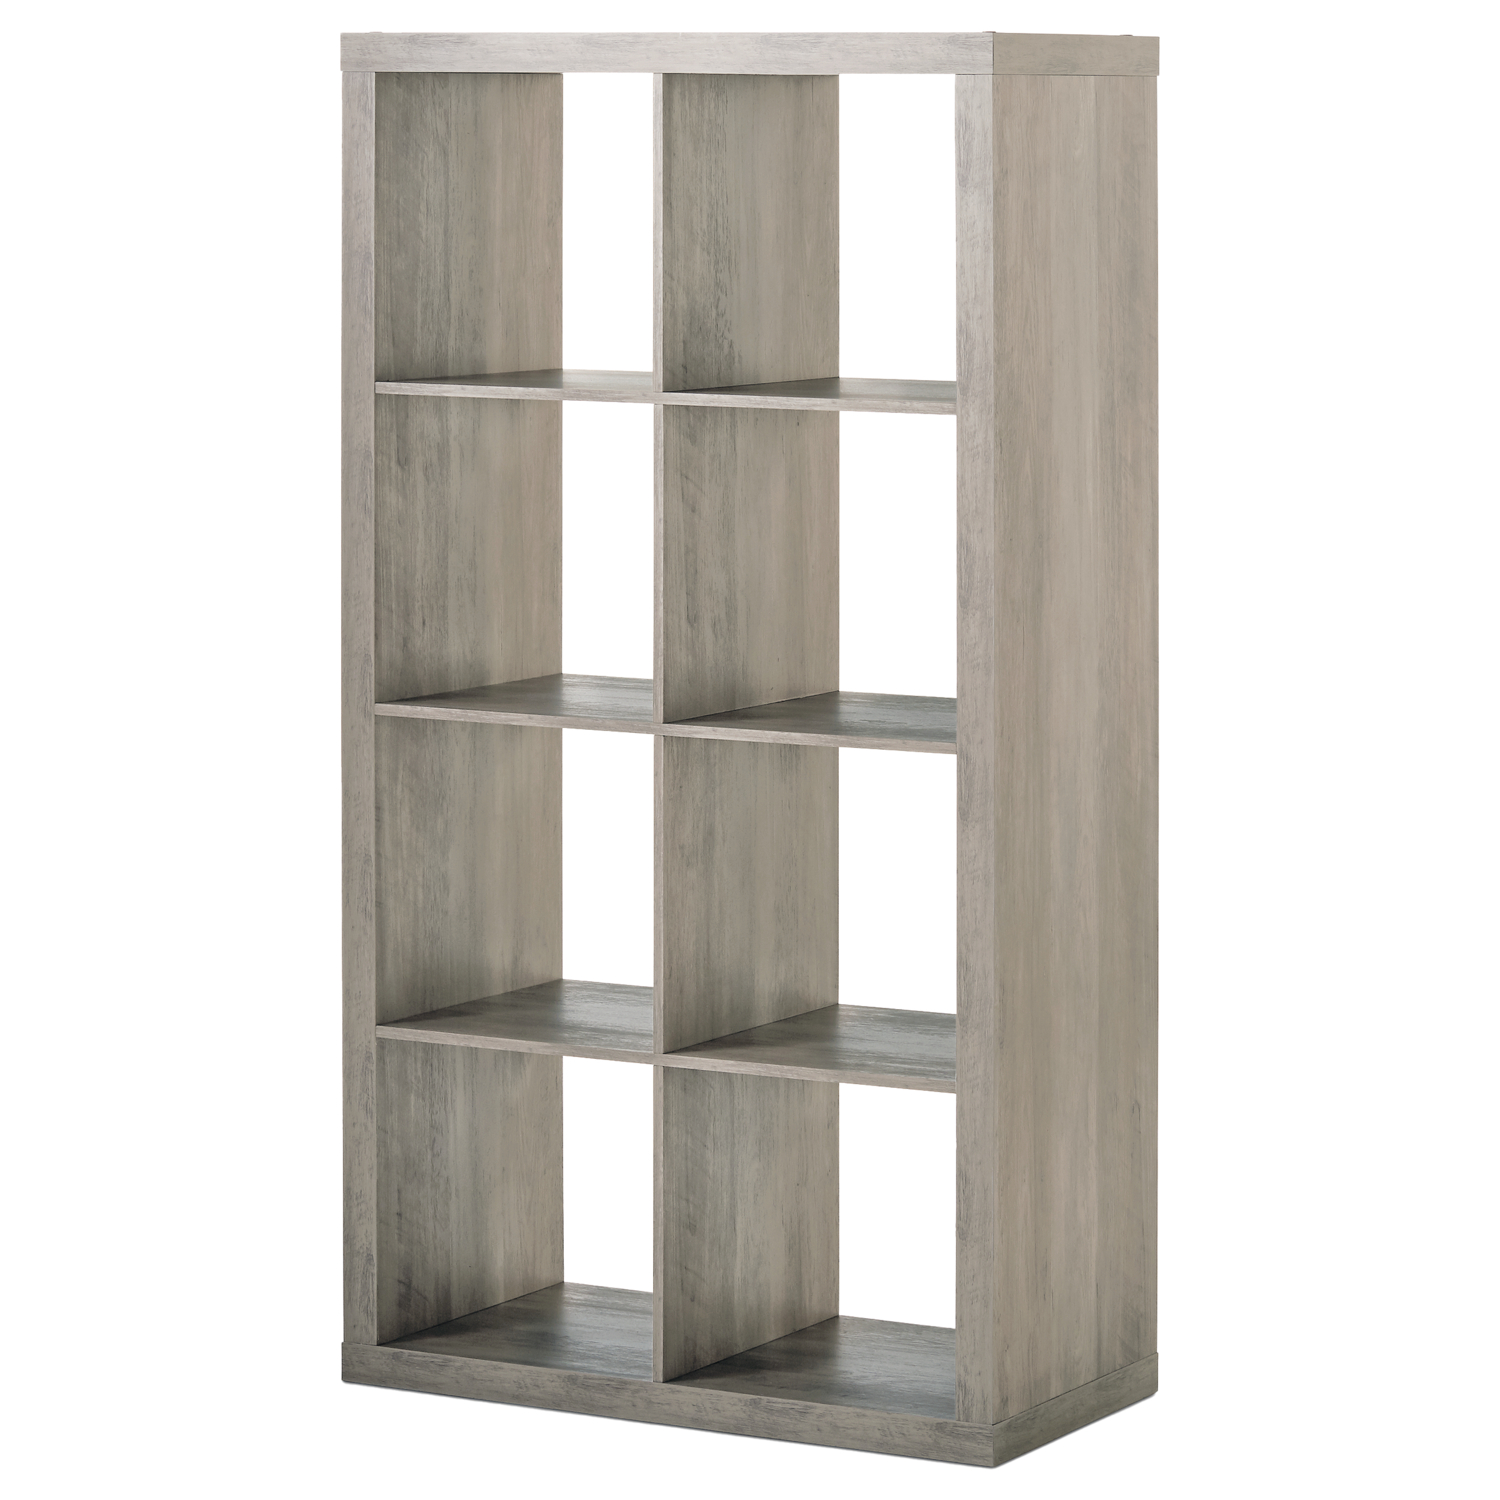 Better Homes & Gardens 8-Cube Storage Organizer, Rustic Gray - image 1 of 7